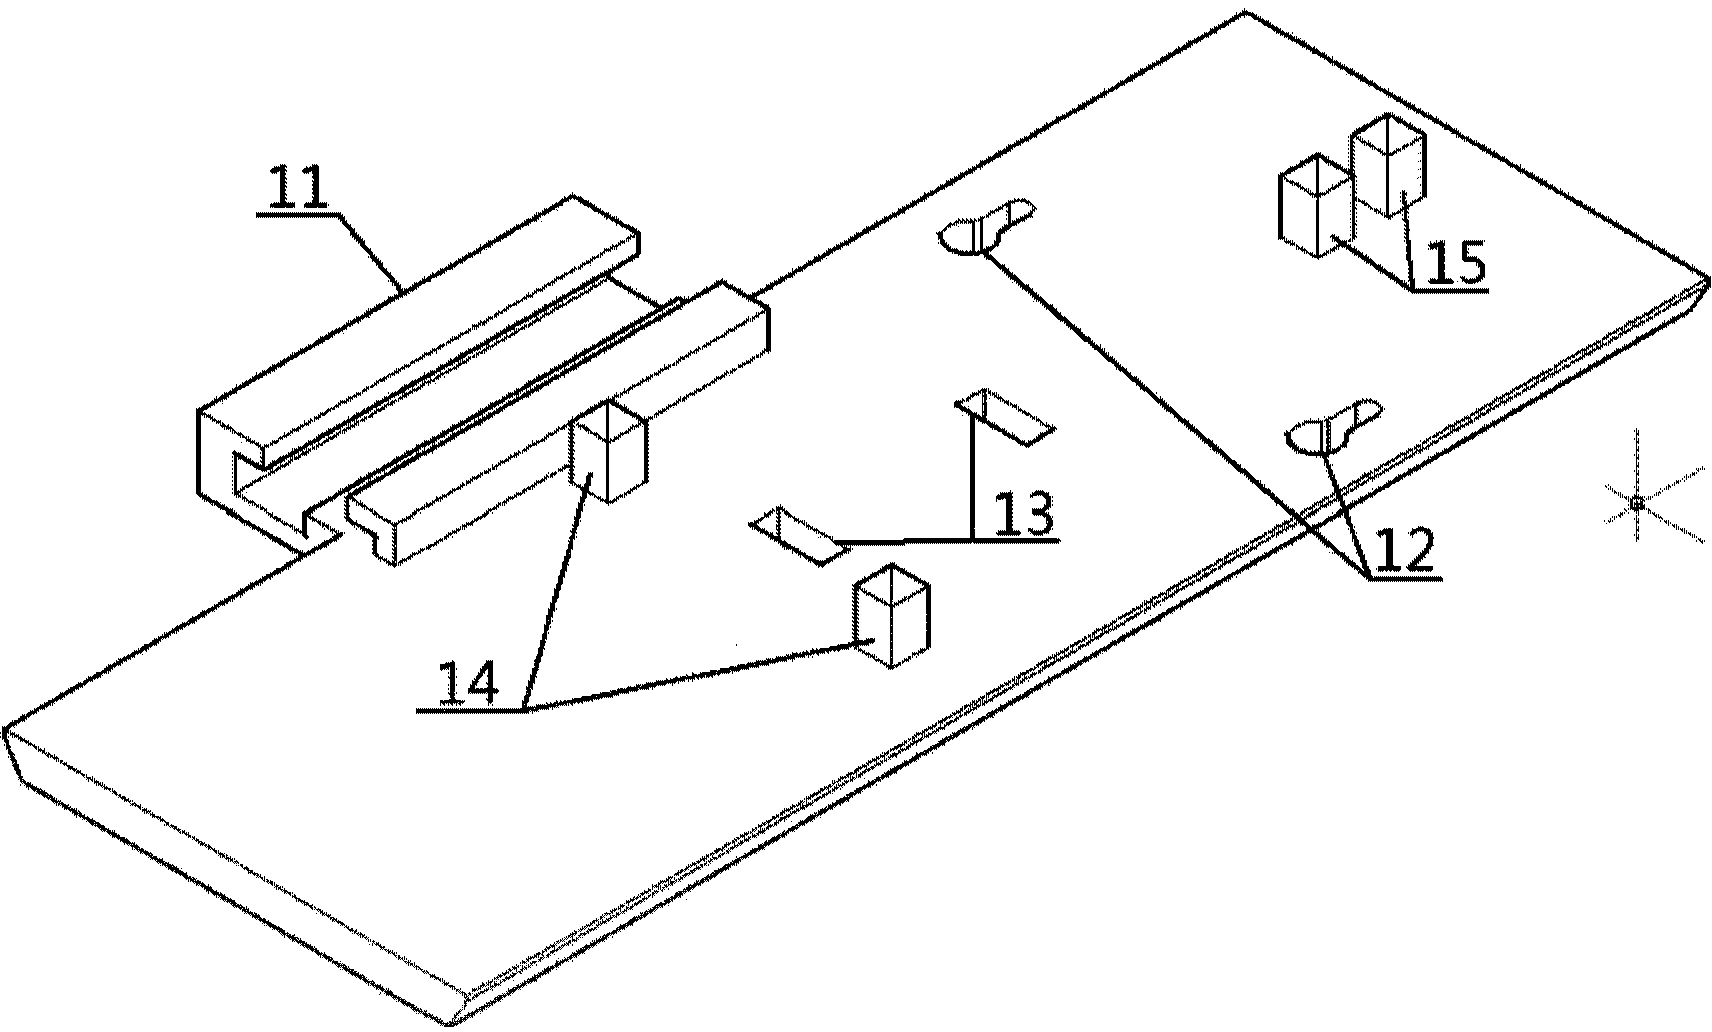 Small animal brain three-dimensional positioning system for magnetic resonance imaging scanning equipment